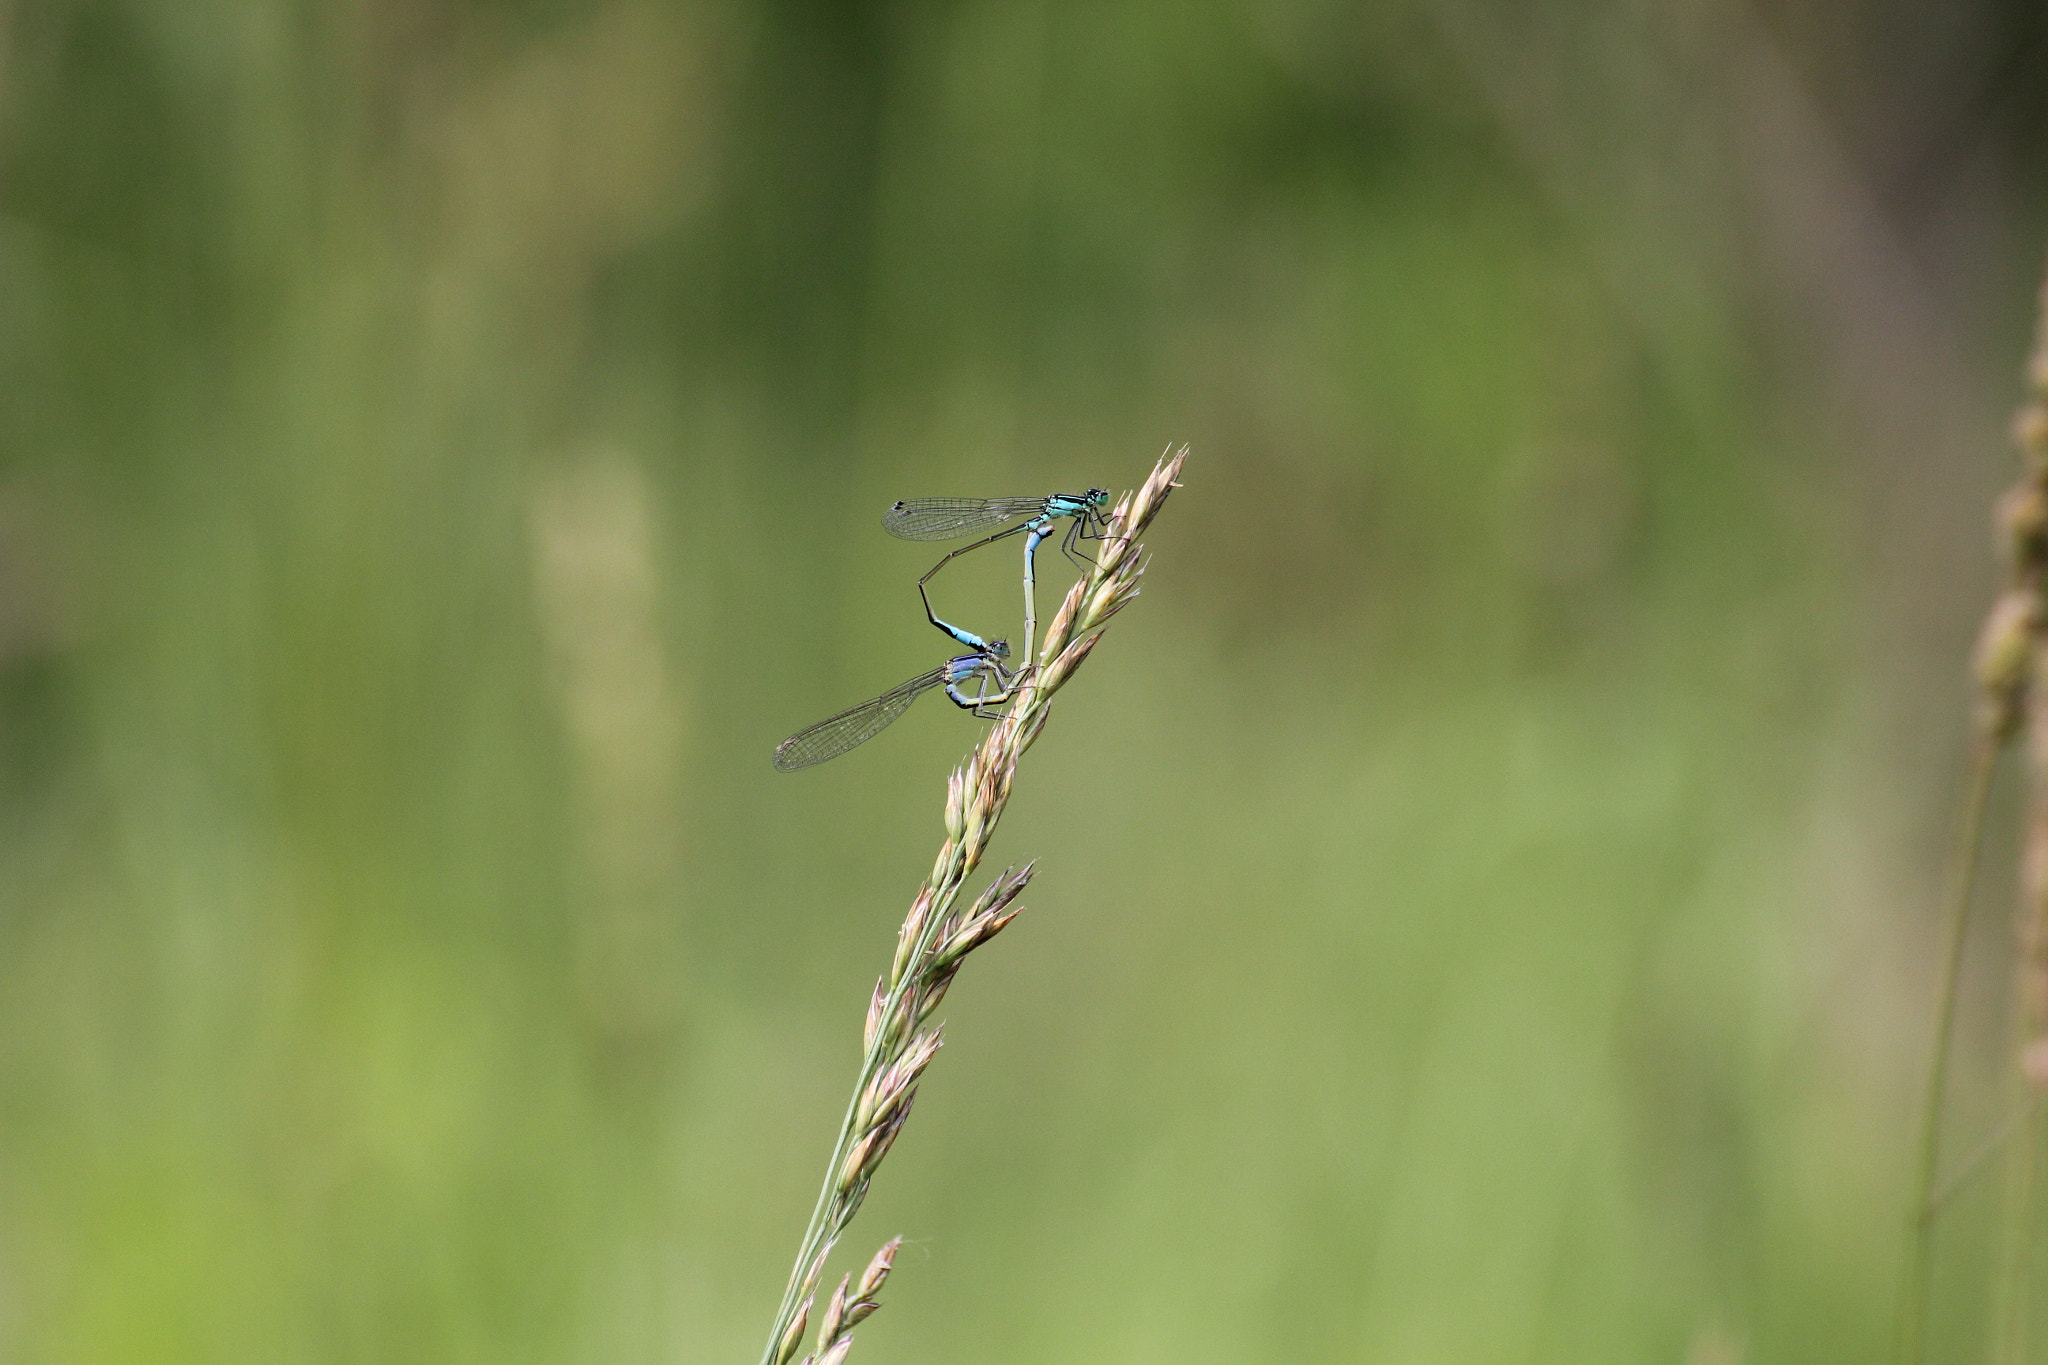 Tamron SP 35mm F1.8 Di VC USD sample photo. Love's dragonfly photography